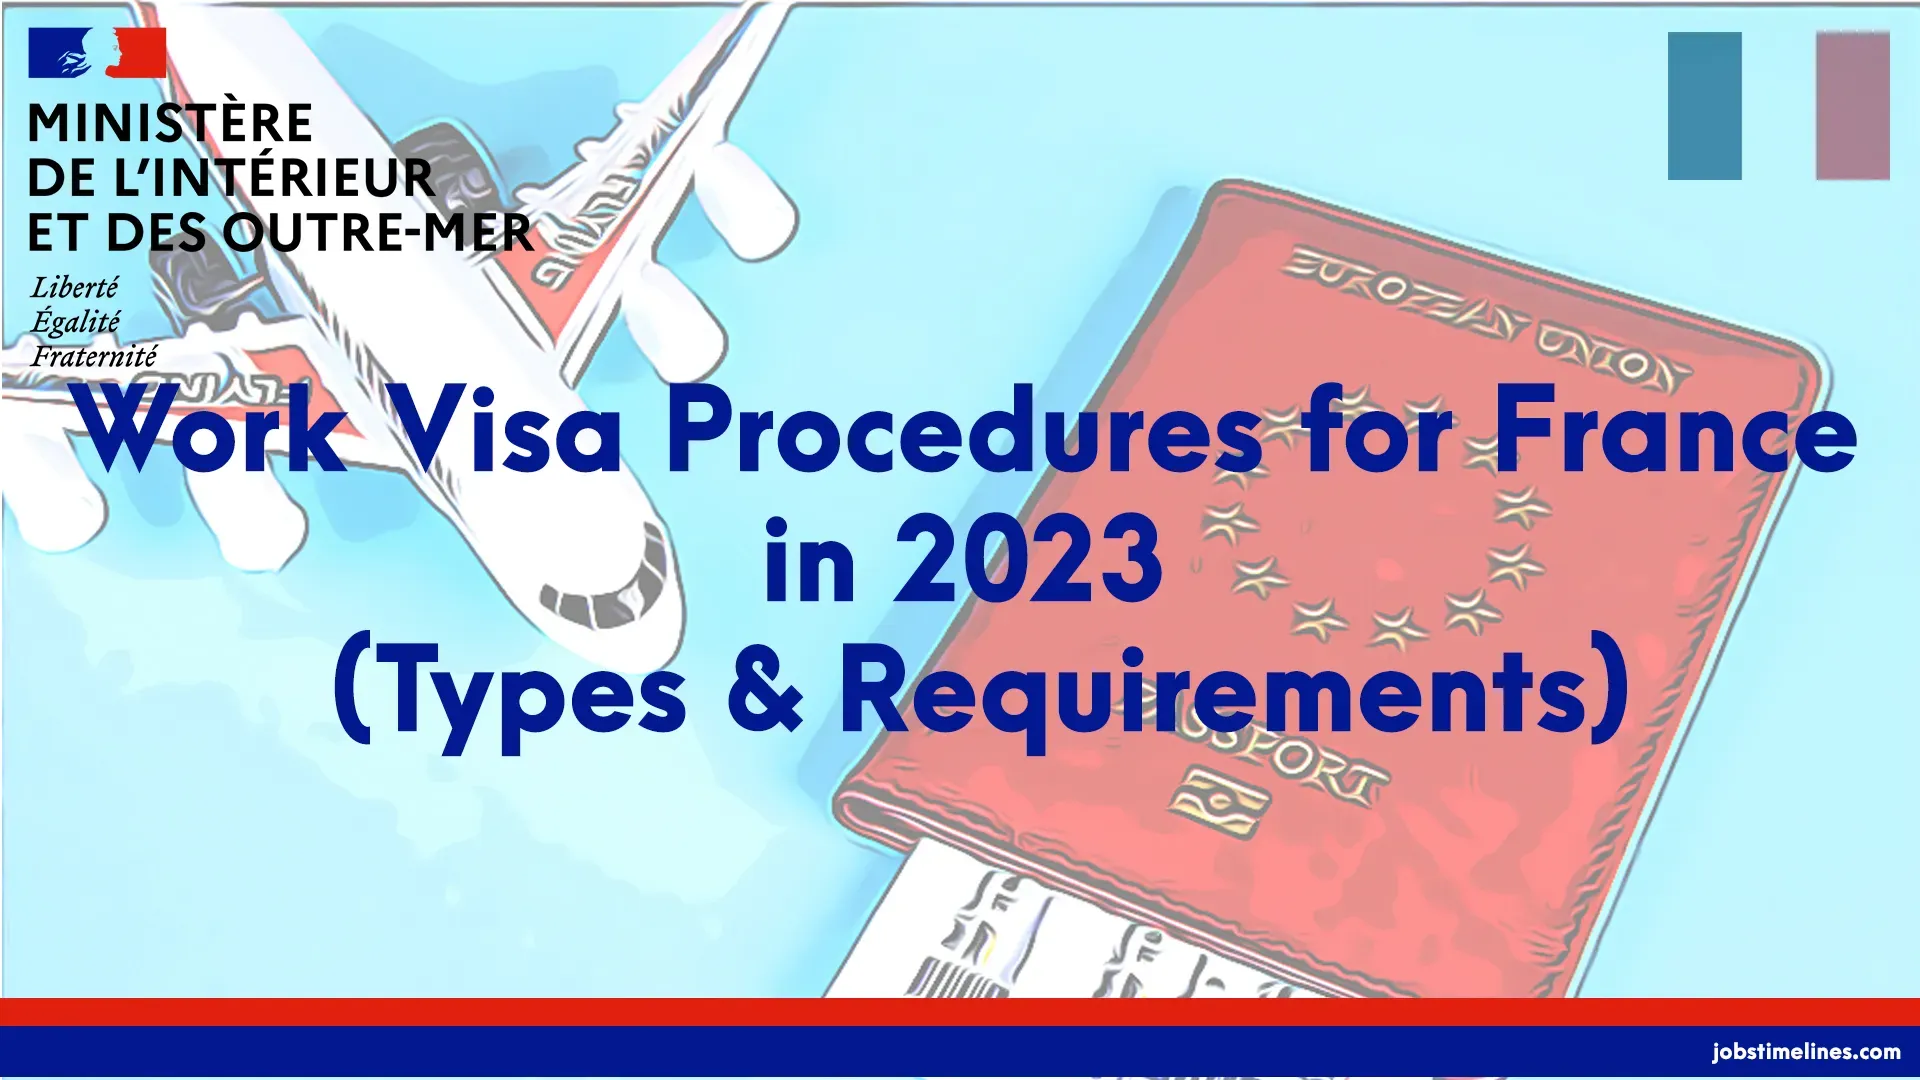 Work Visa Procedures for France in 2023 (Types, Requirements)